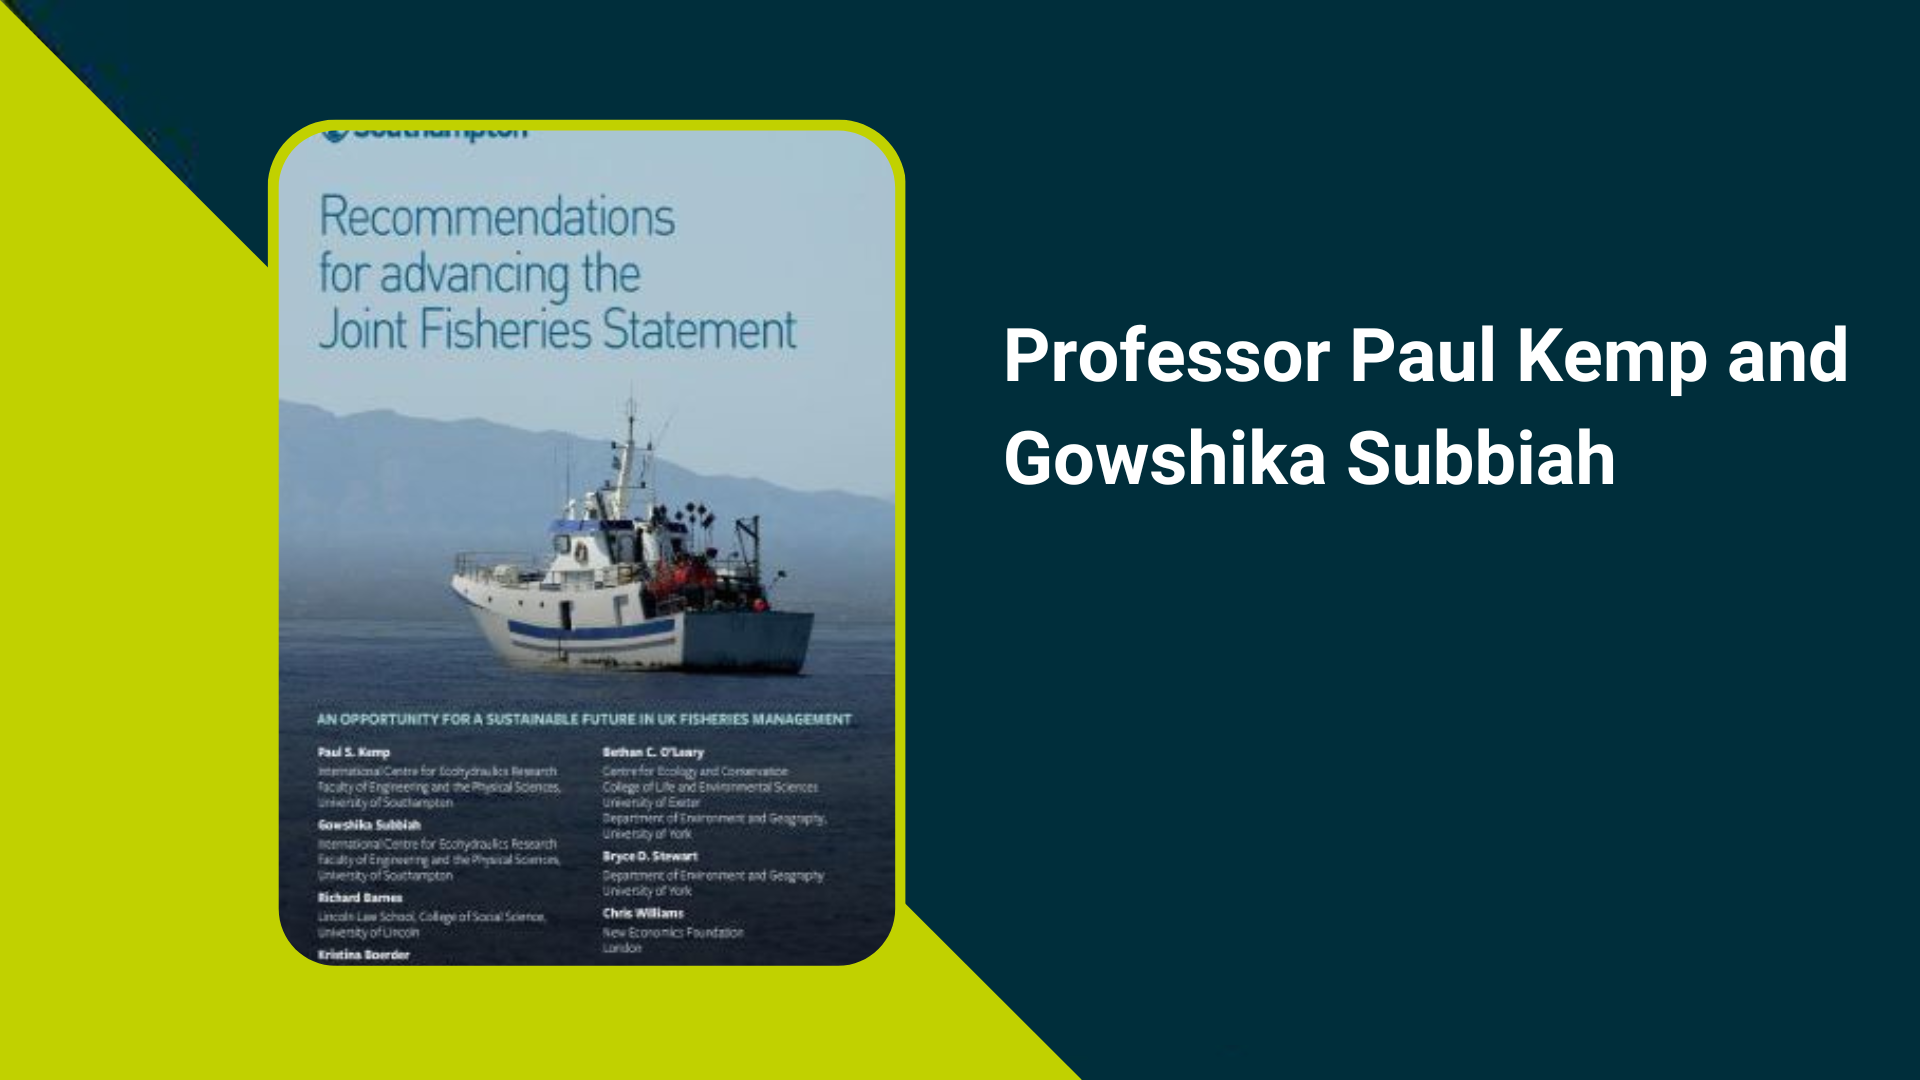 Recommendations for advancing the Joint Fisheries Statement